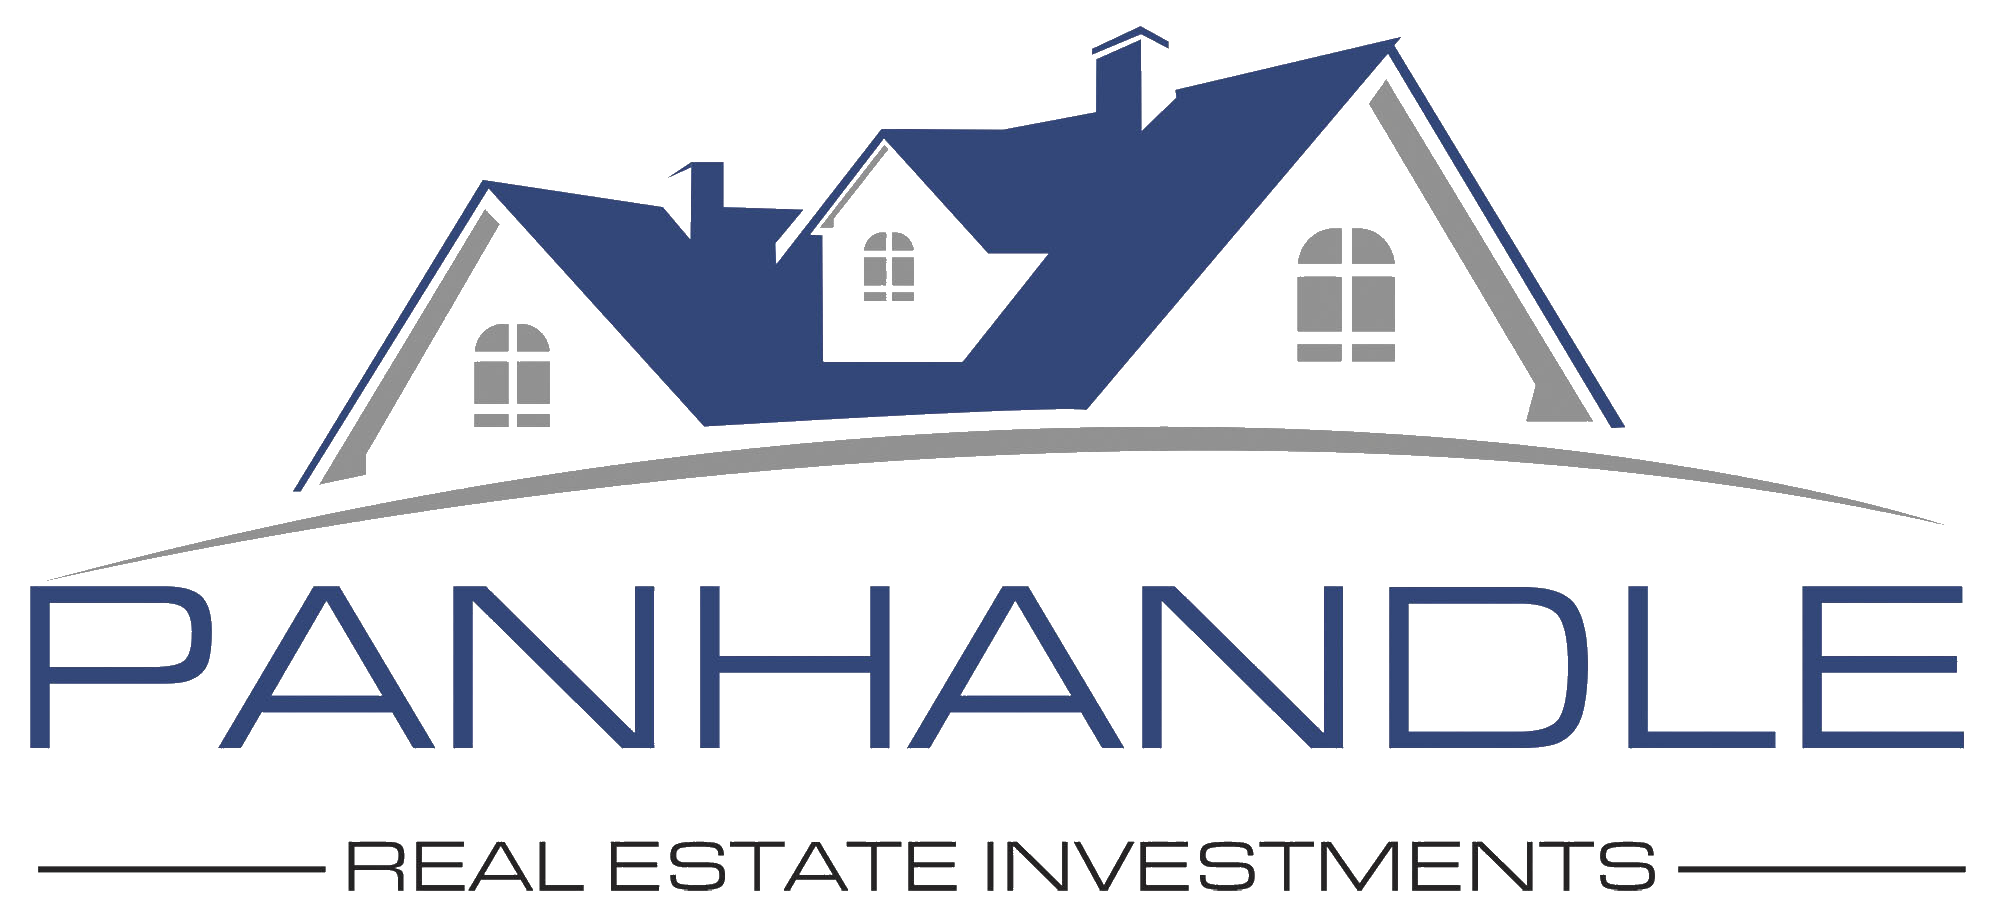 Panhandle Real Estate Investments logo